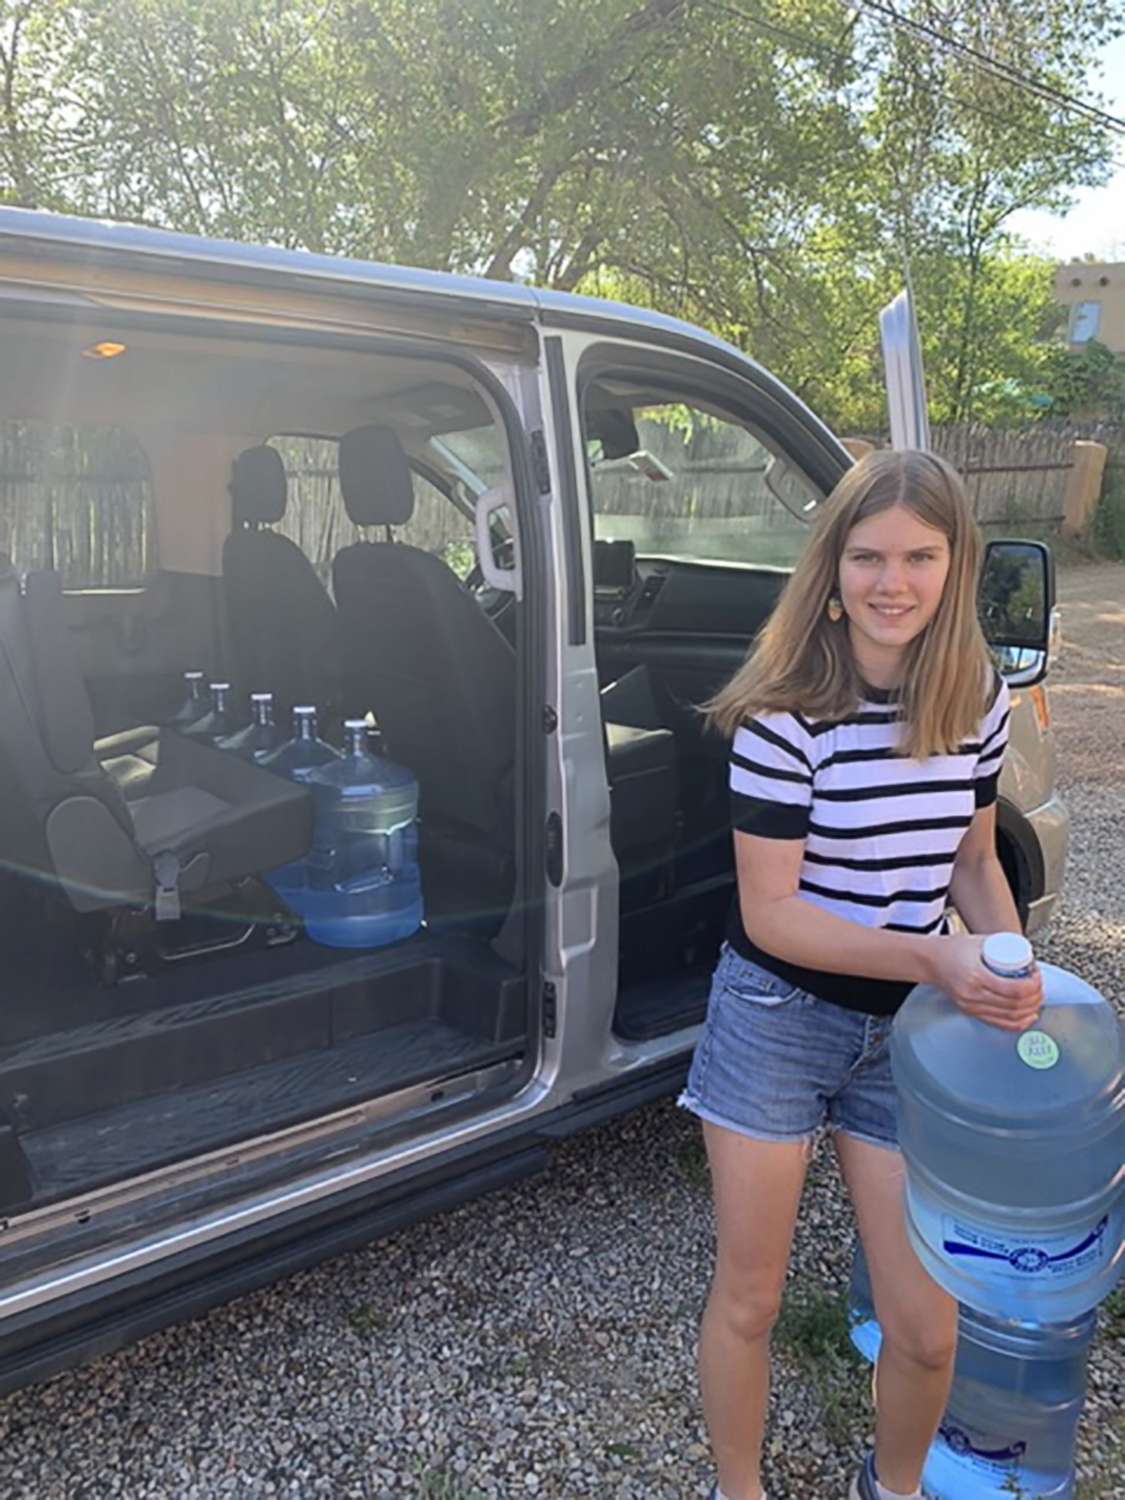 PHOTO: Daisy Russell loads water jugs into a van full of supplies in Santa Fe, N.M., before delivering them with her family to the Navajo reservation in Window Rock, Ariz.